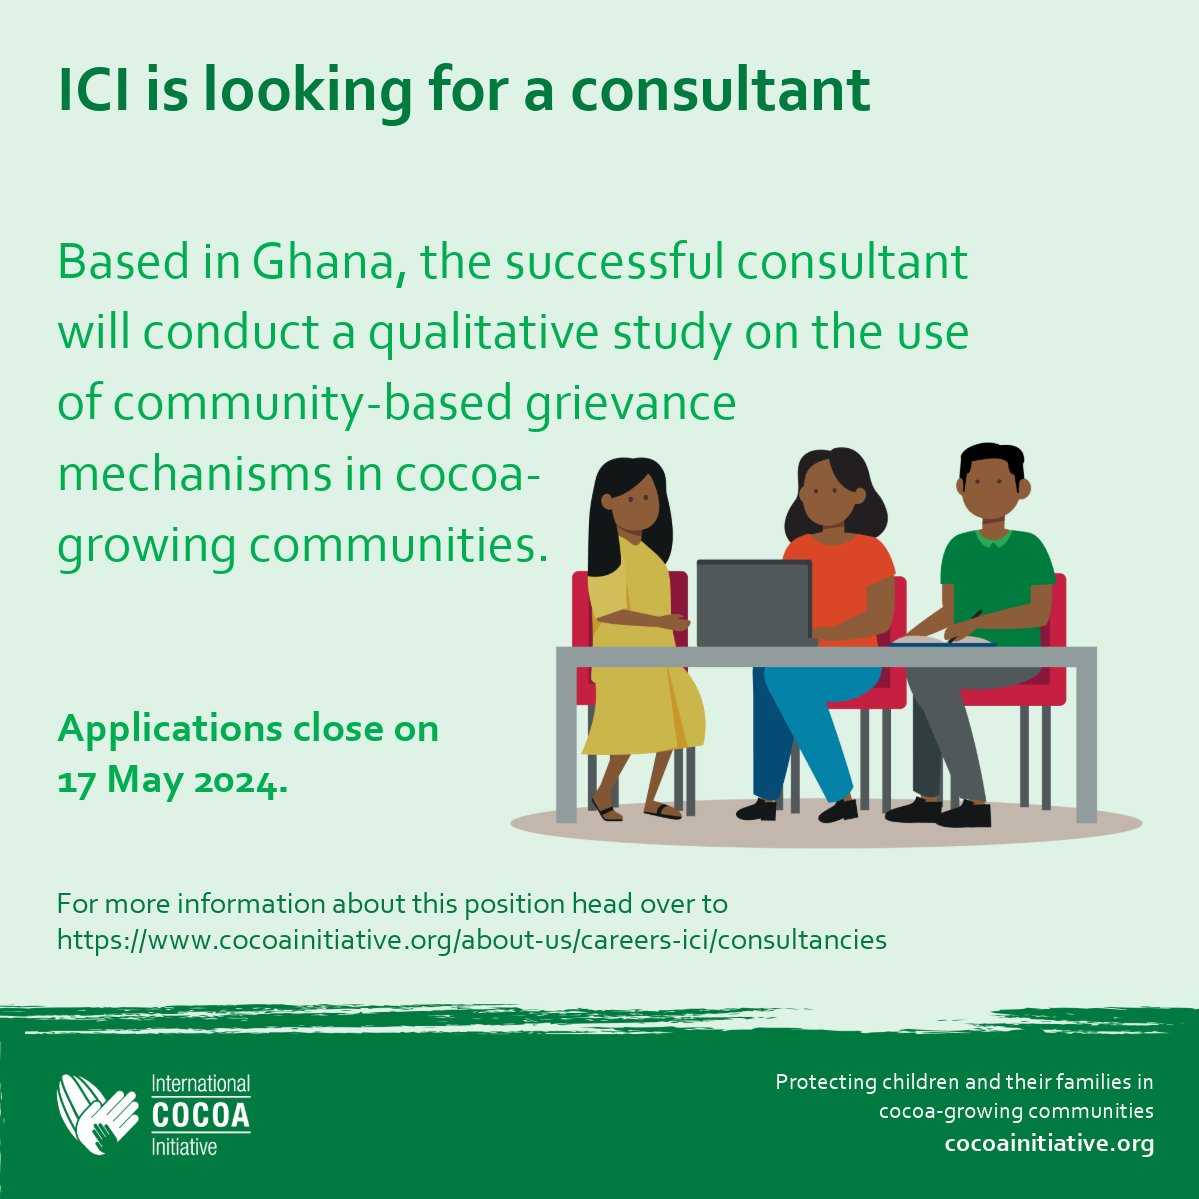 ICI is seeking a consultant to conduct a qualitative study in Ghana, expanding on research done by ICI the consultant will examine how community-based grievance mechanisms can be further improved and implemented sustainably in the longer term. Apply here: bit.ly/49ySwuz